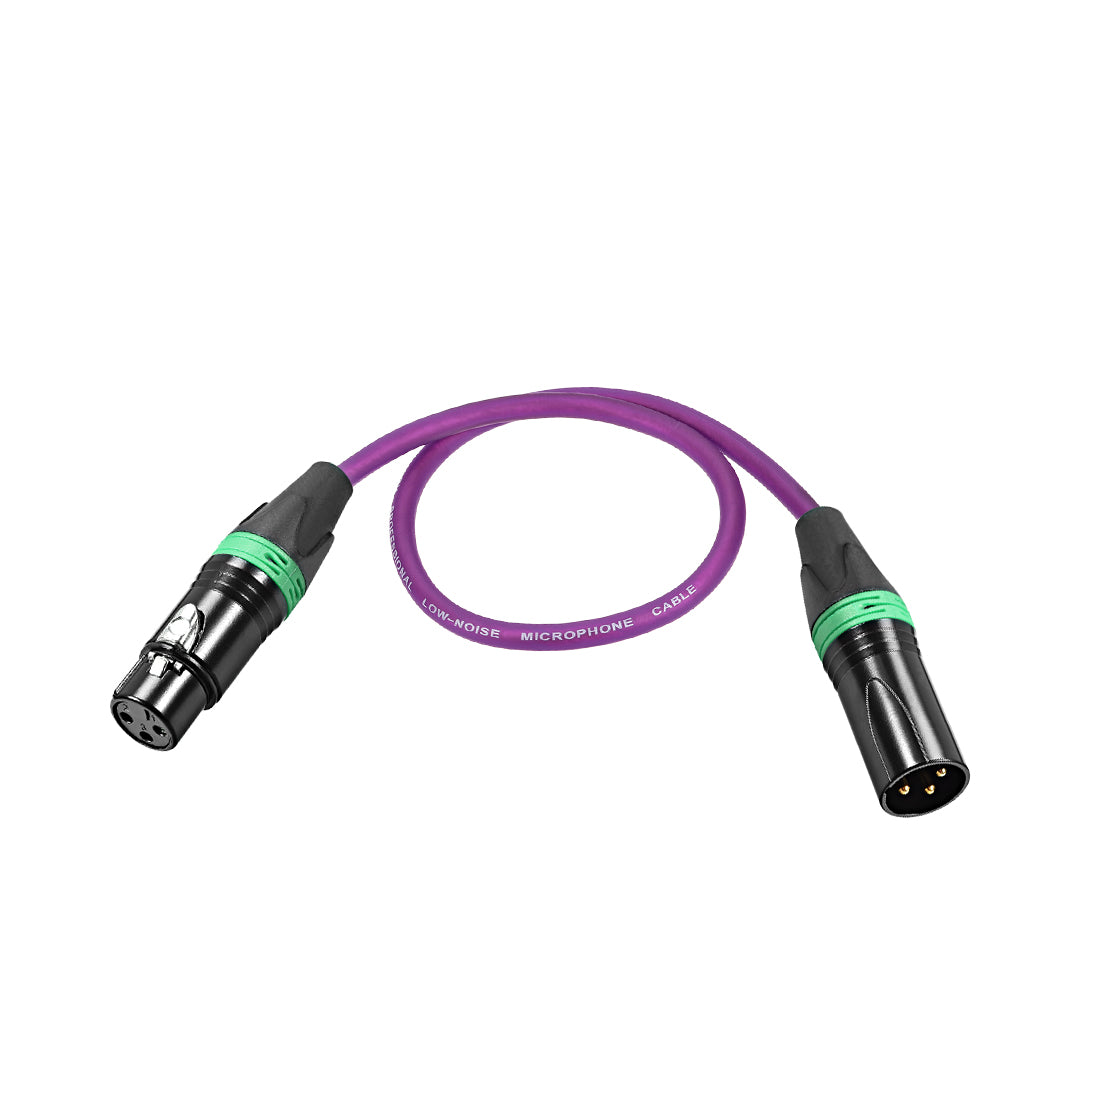 uxcell Uxcell XLR Male to XLR Female Cable Line for Microphone Video Camera Sound Card Mixer Green Black XLR Purple Line 0.5M 1.64ft